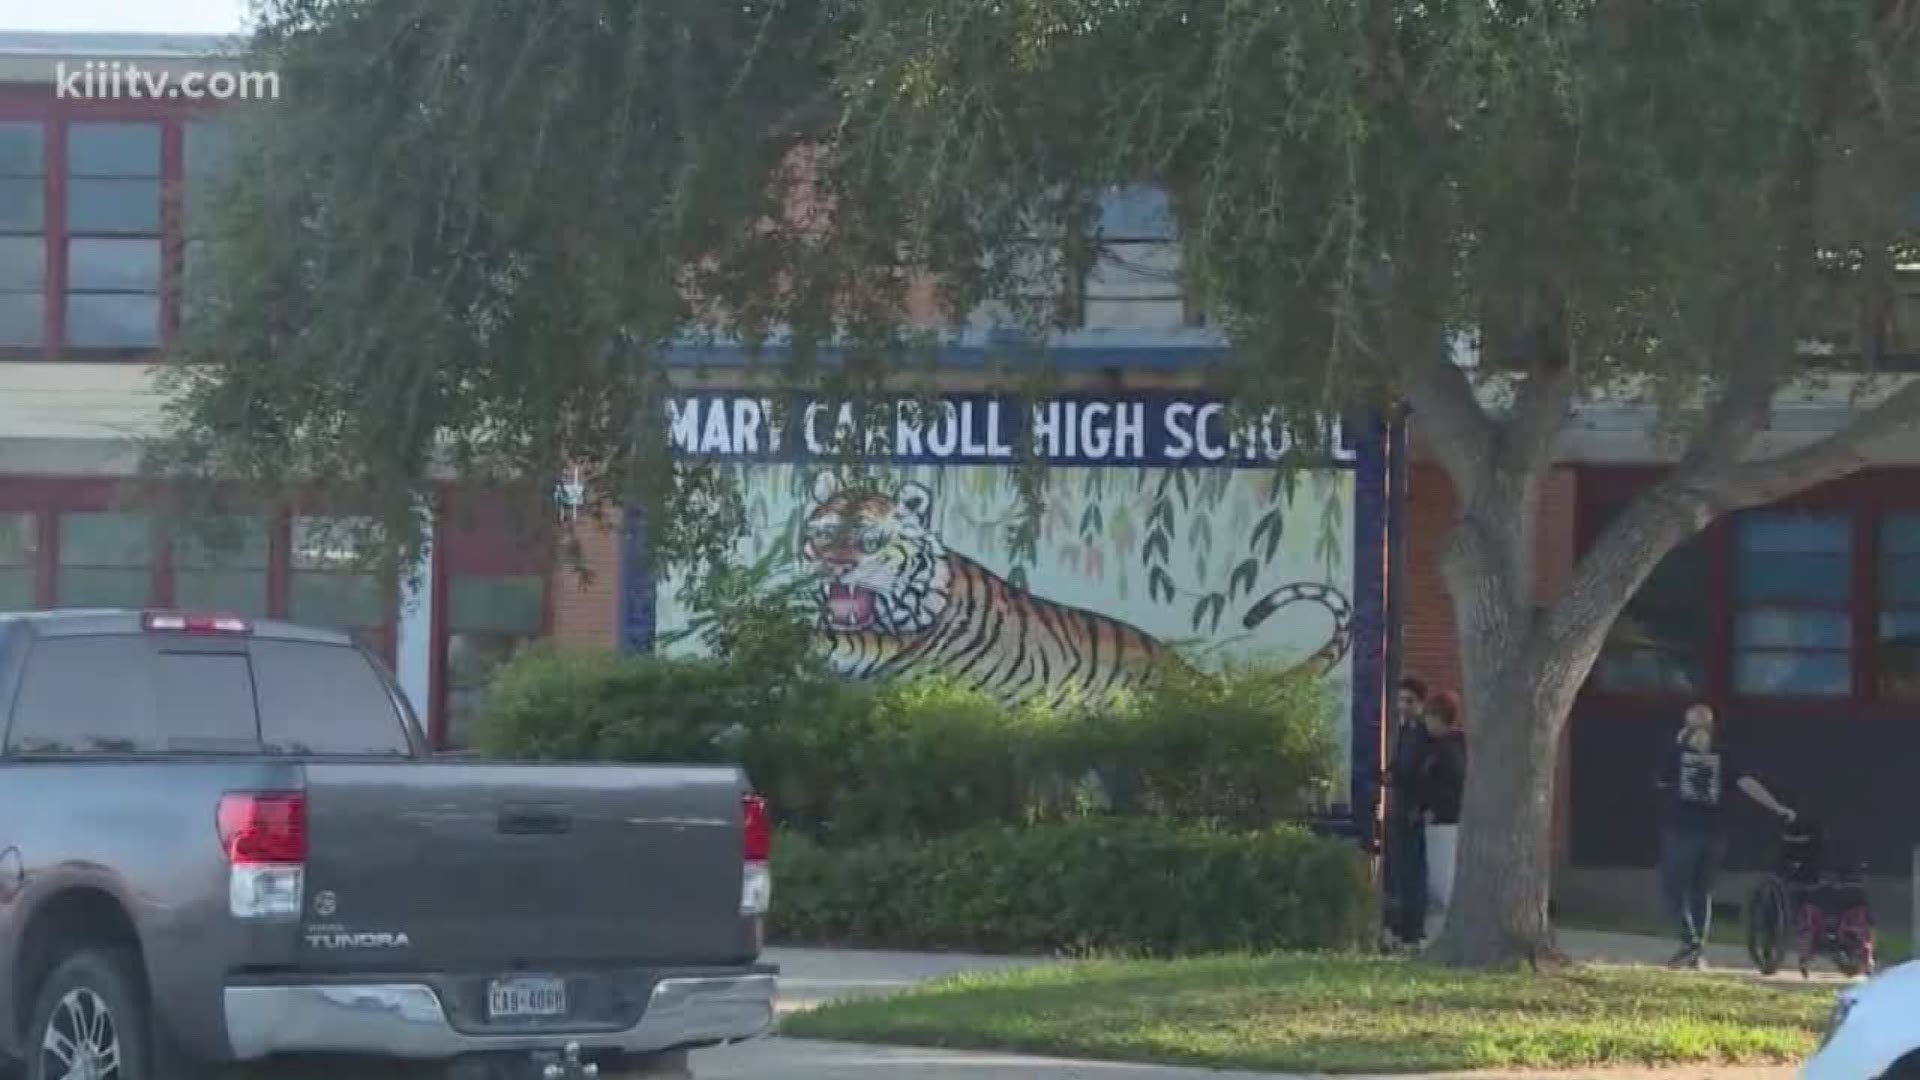 A planned change in location for the new Mary Carroll High School campus was finally approved on Monday.